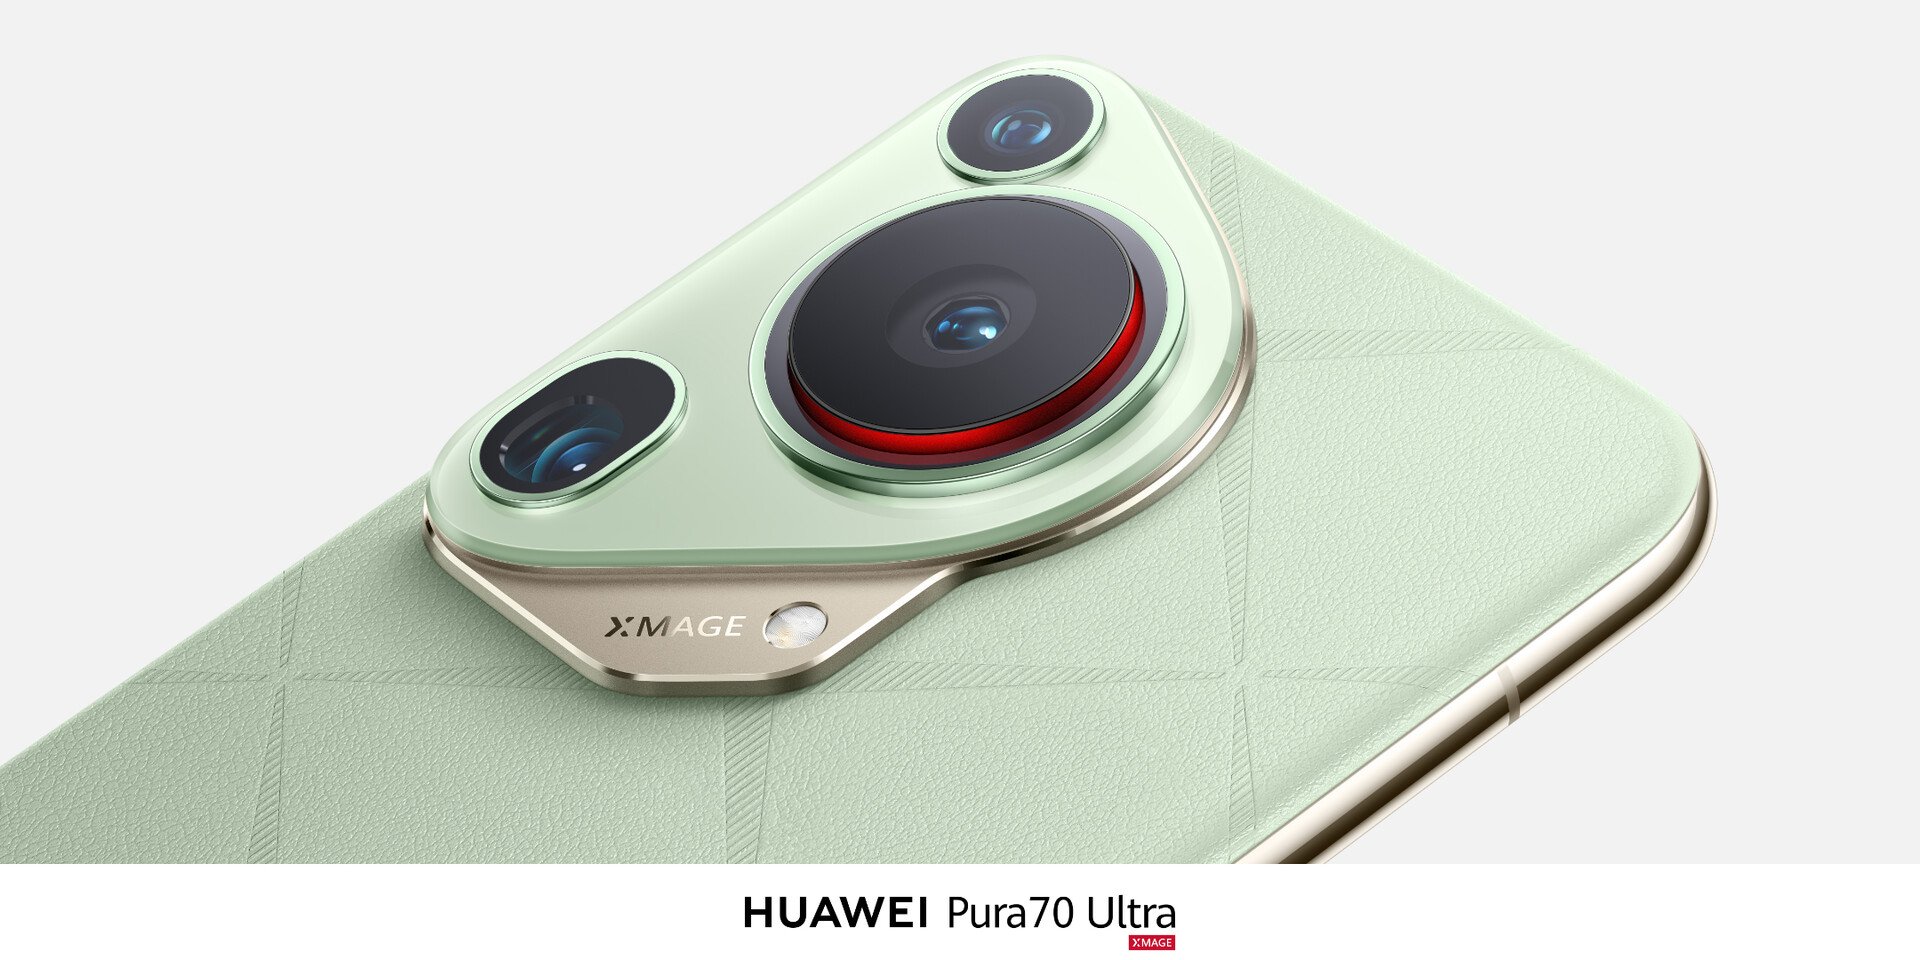 Huawei Pura 70 series smartphones arrive in Europe with a starting Cost of €999